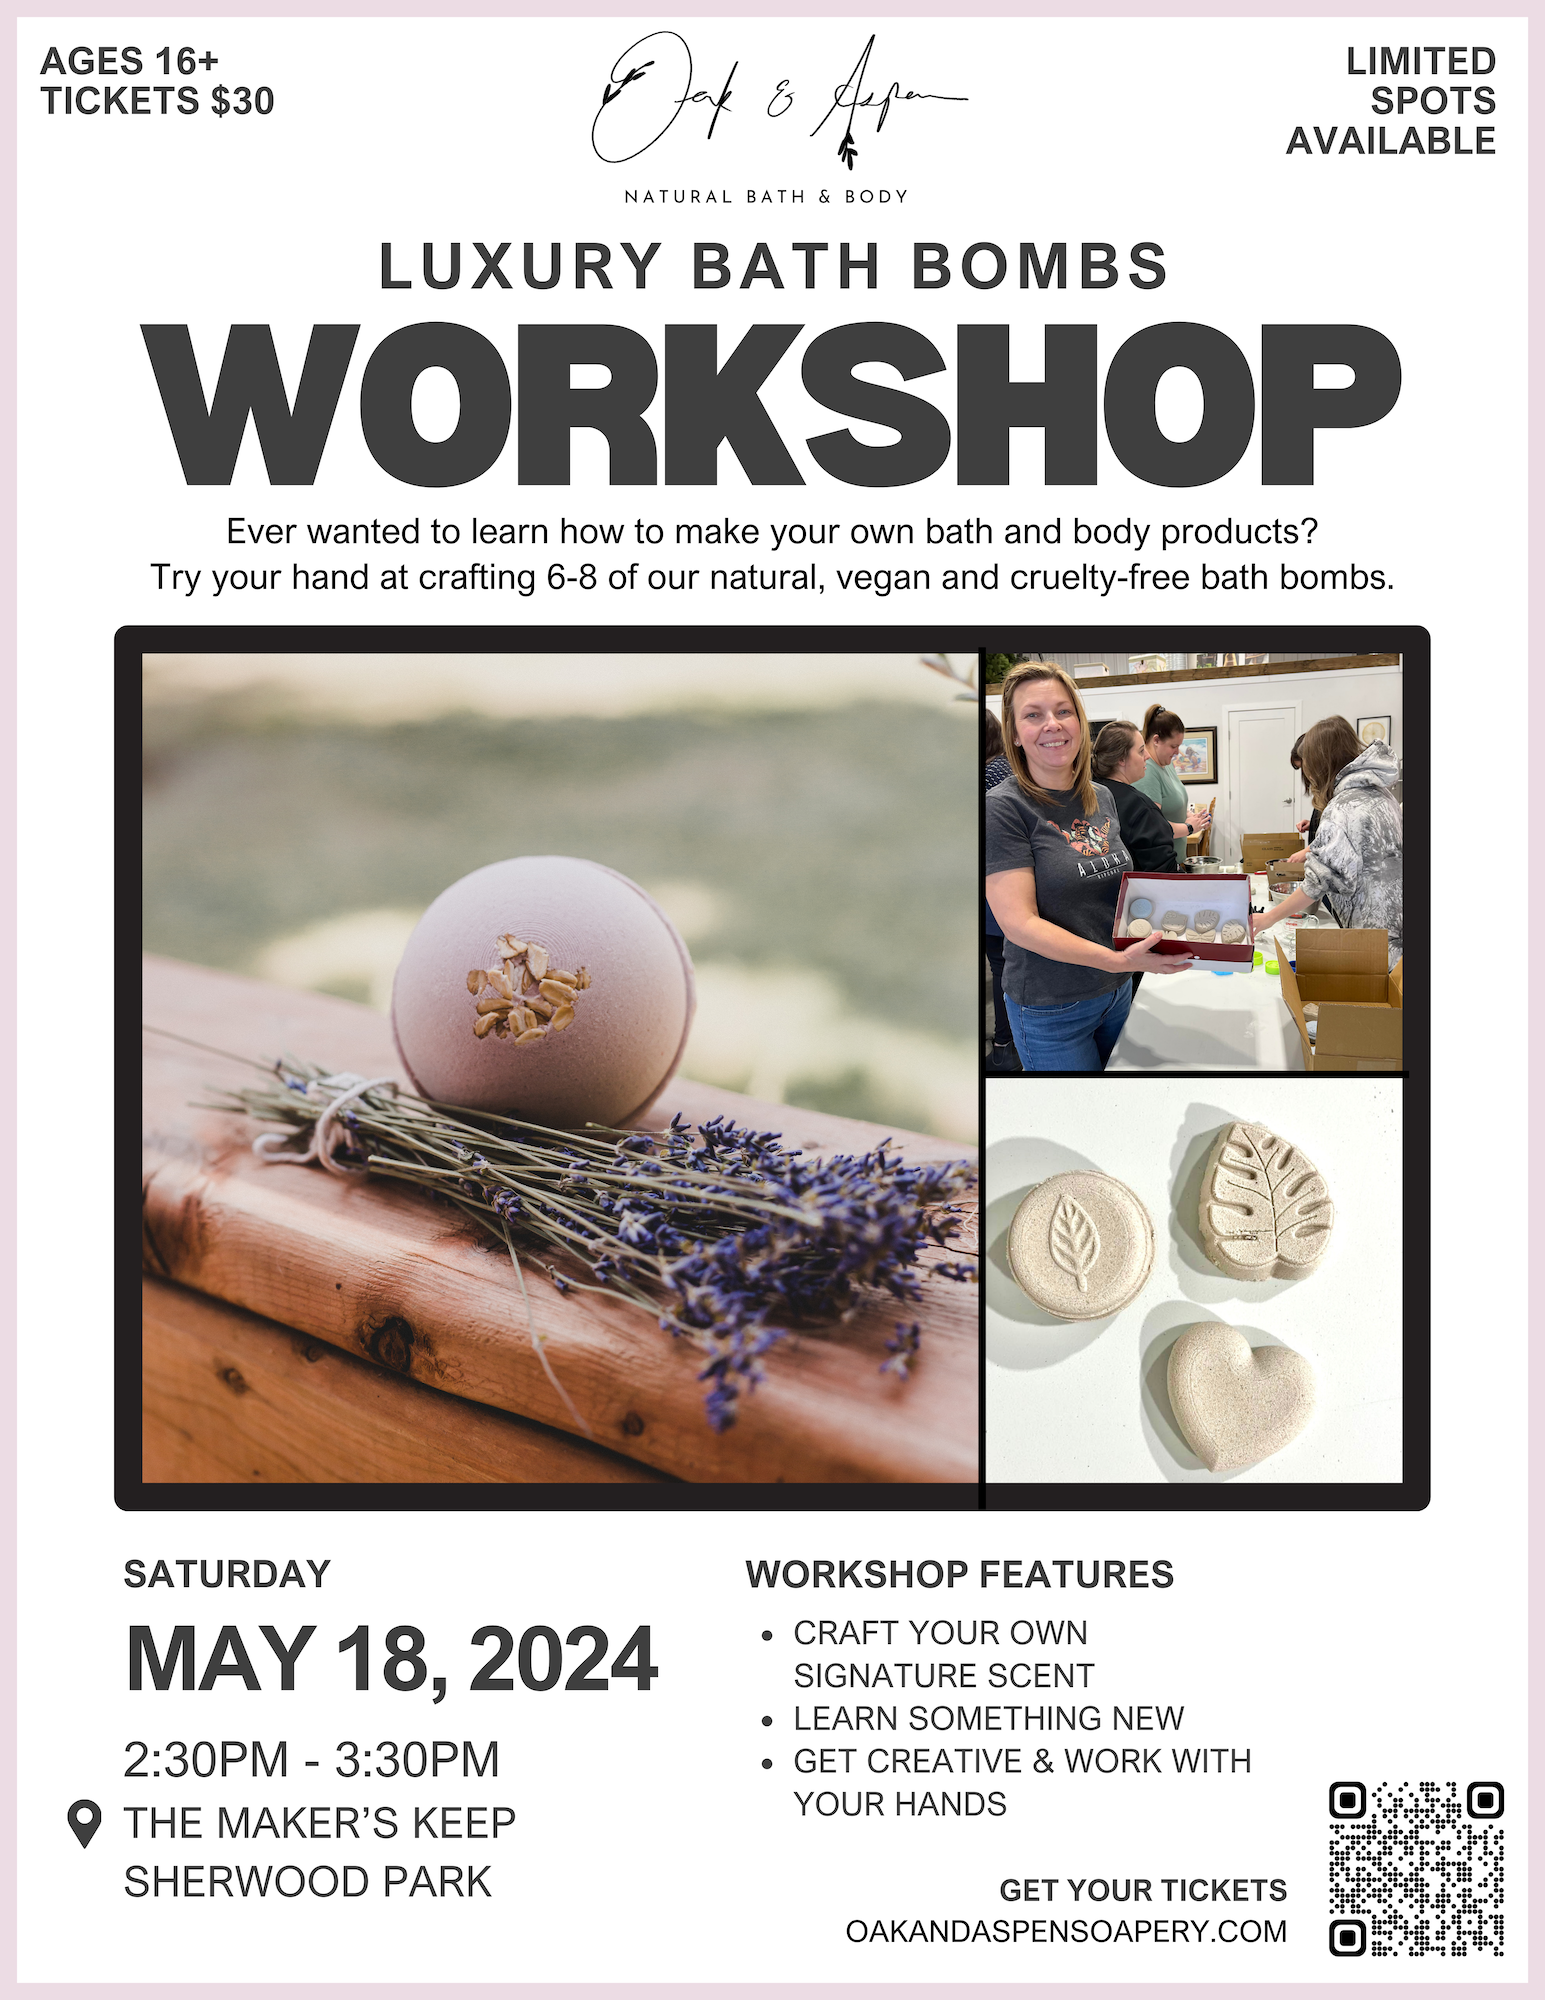 Luxury Bath Bombs (ages 16+) @ The Maker’s Keep Sherwood Park